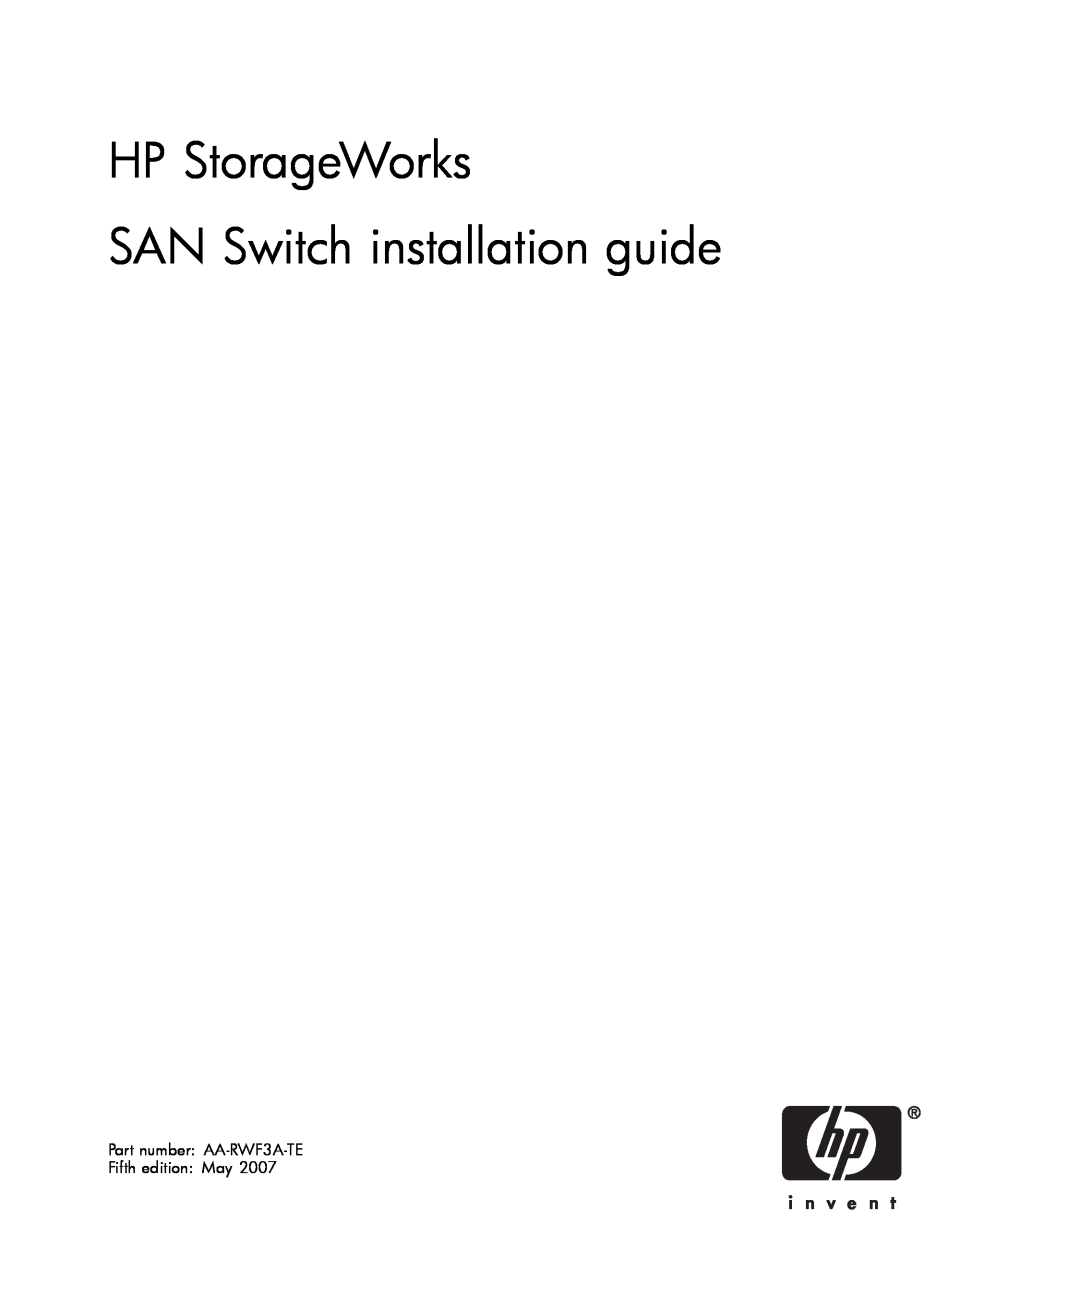 IBM manual HP StorageWorks SAN Switch installation guide, Part number AA-RWF3A-TE Fifth edition May 